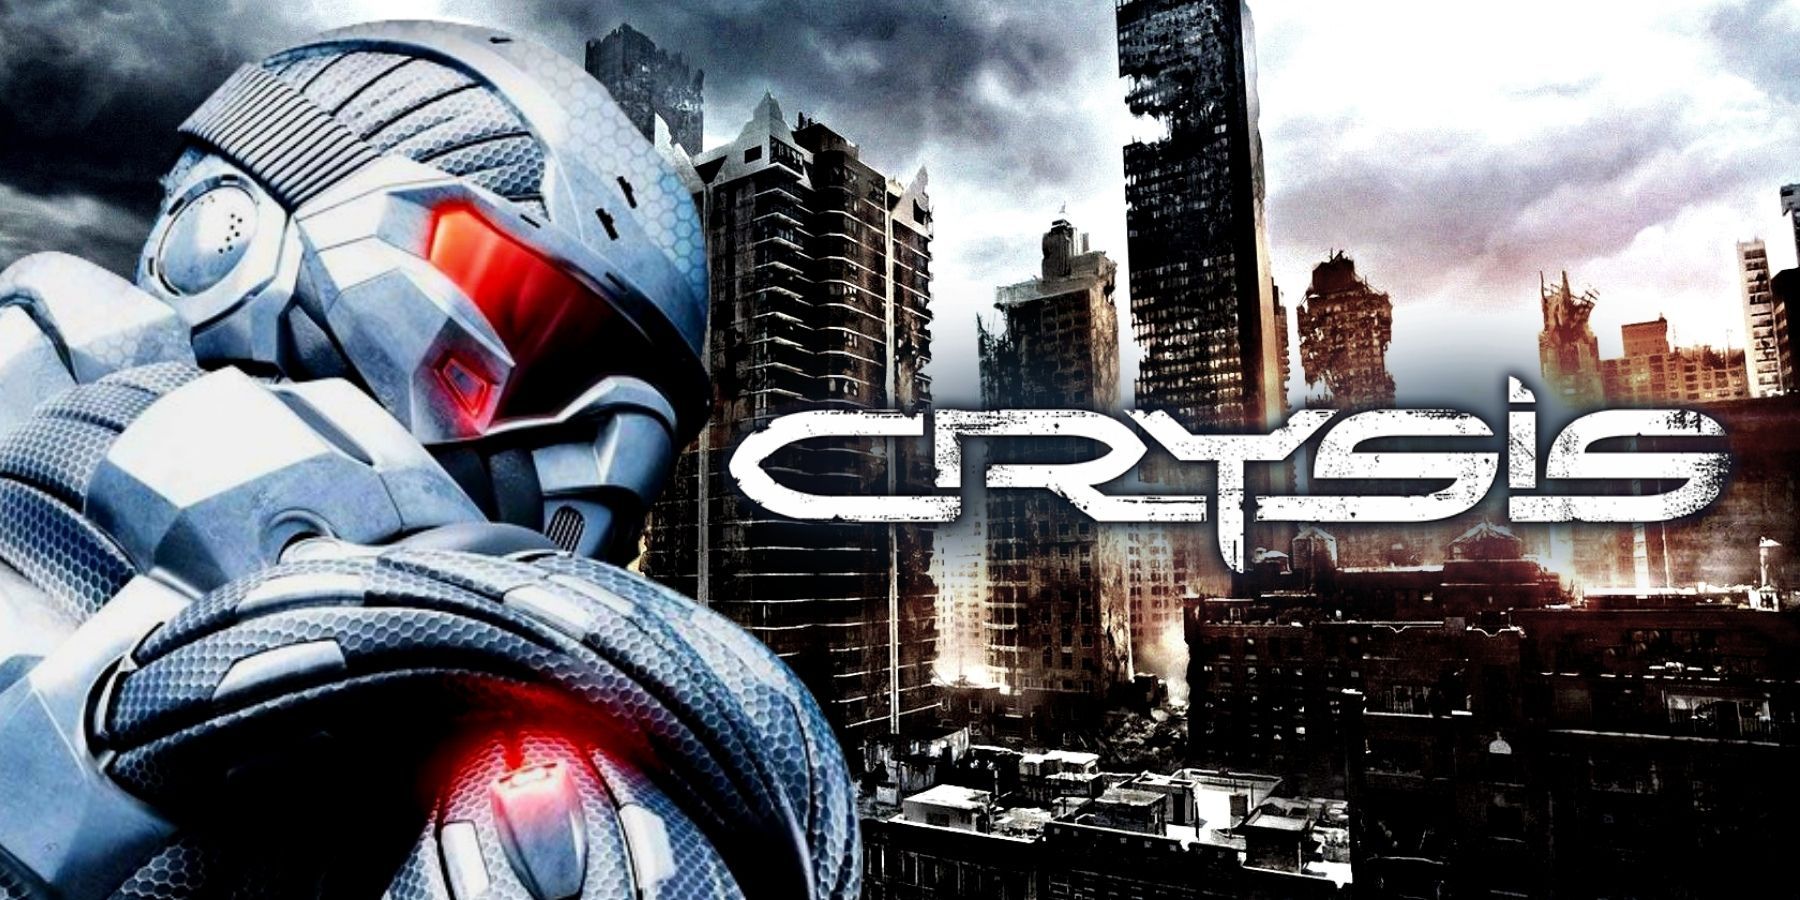 crysis crytek series fps first person history franchise summary